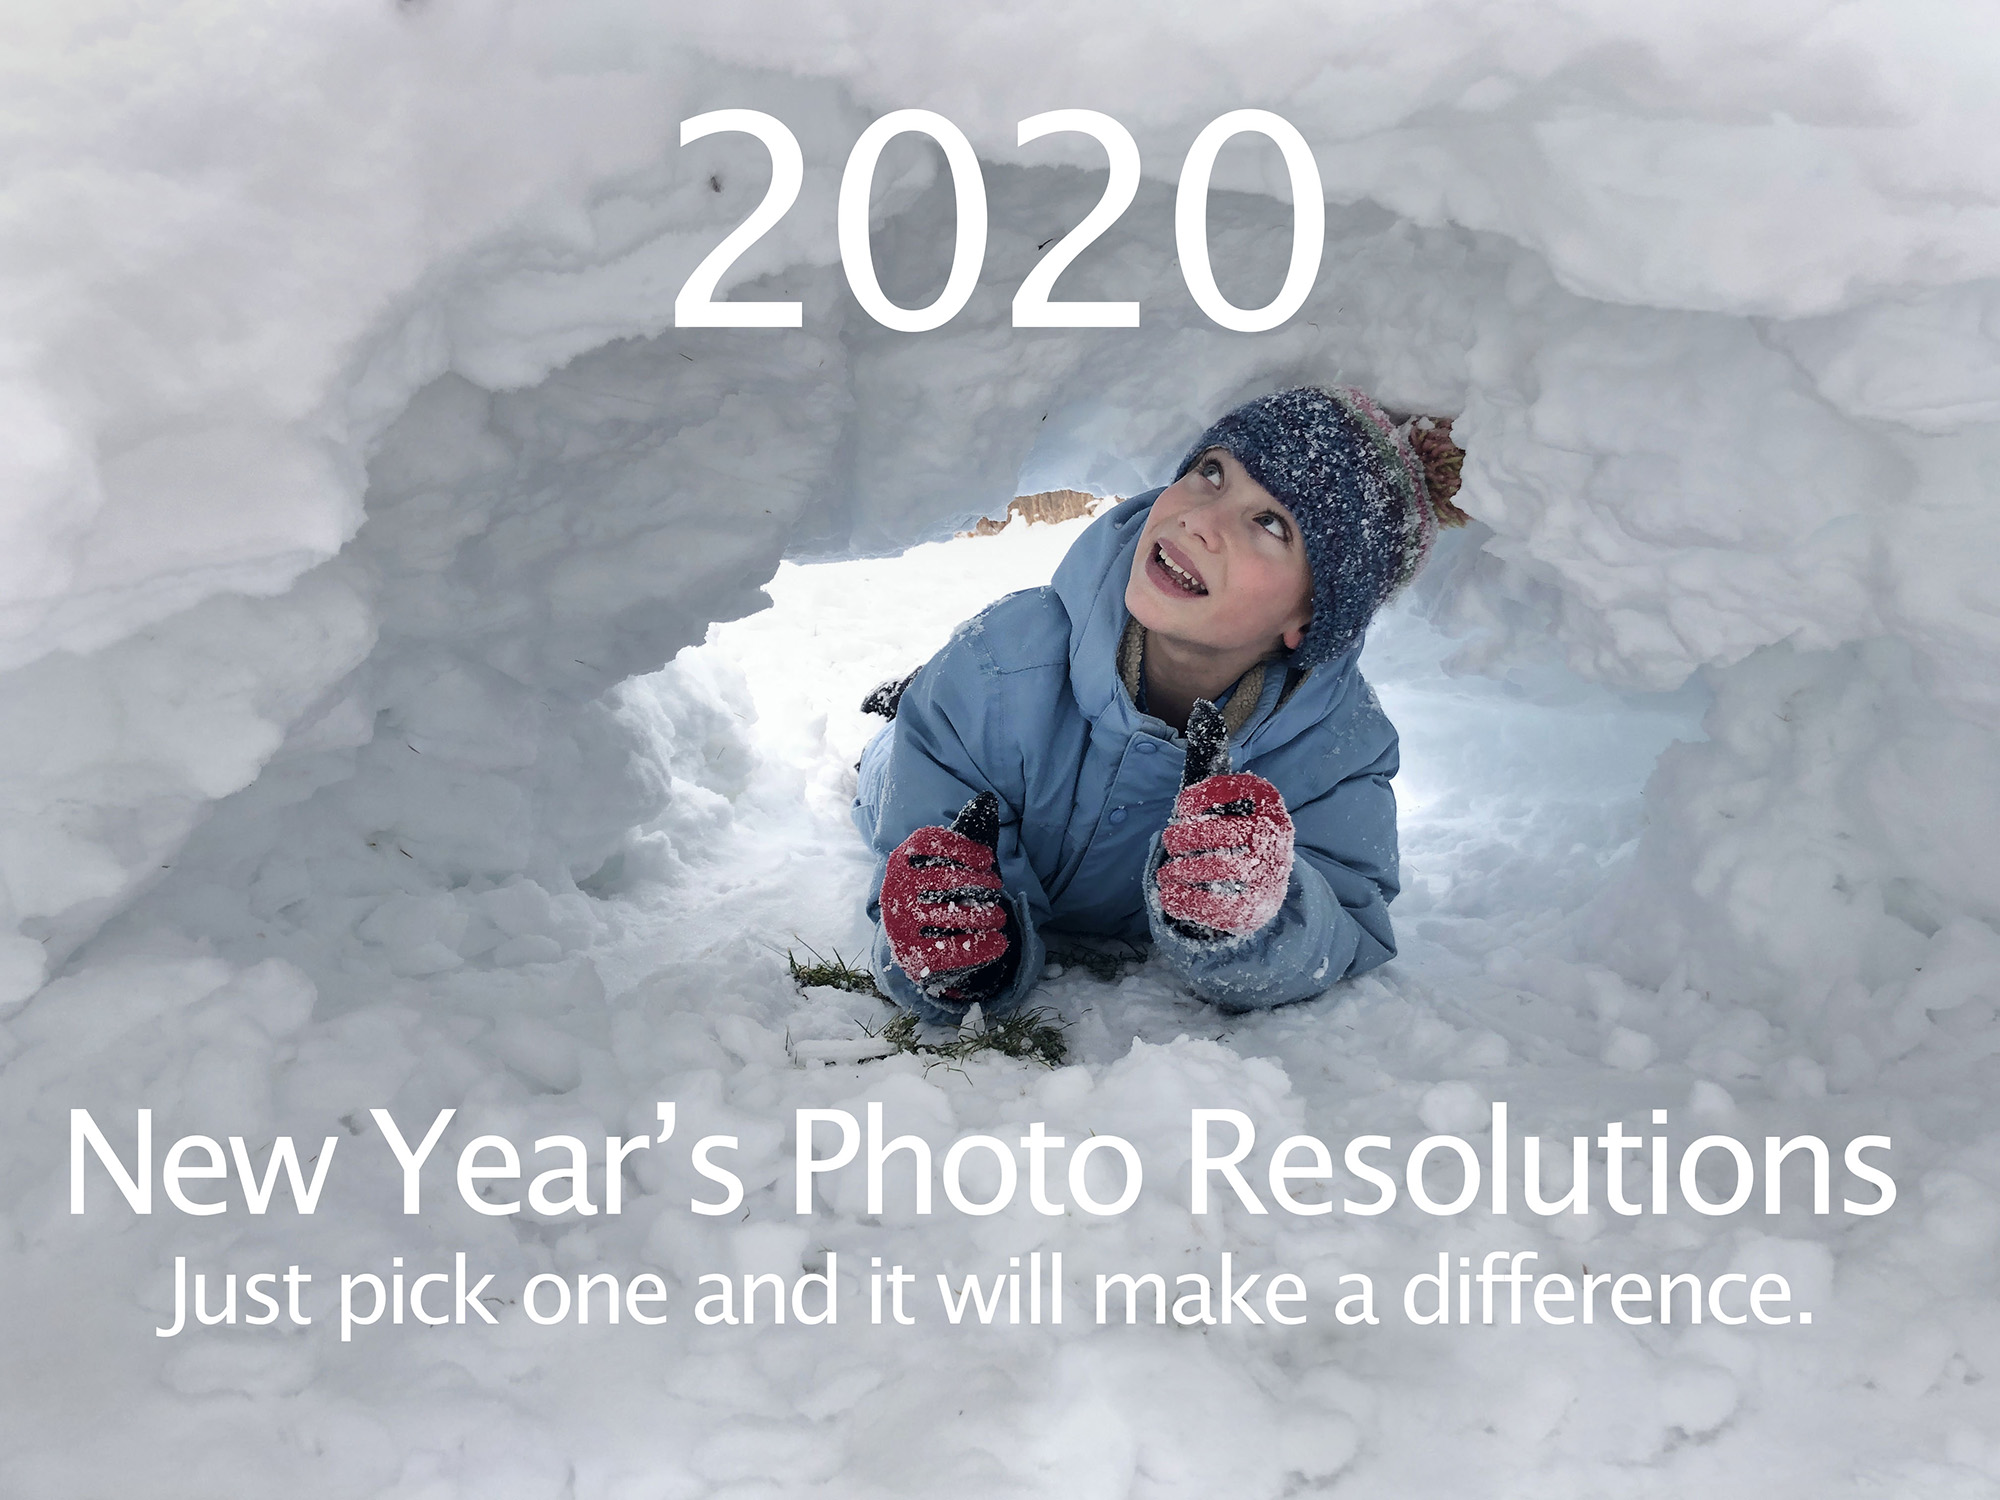 2020 New Year’s Photo Resolutions